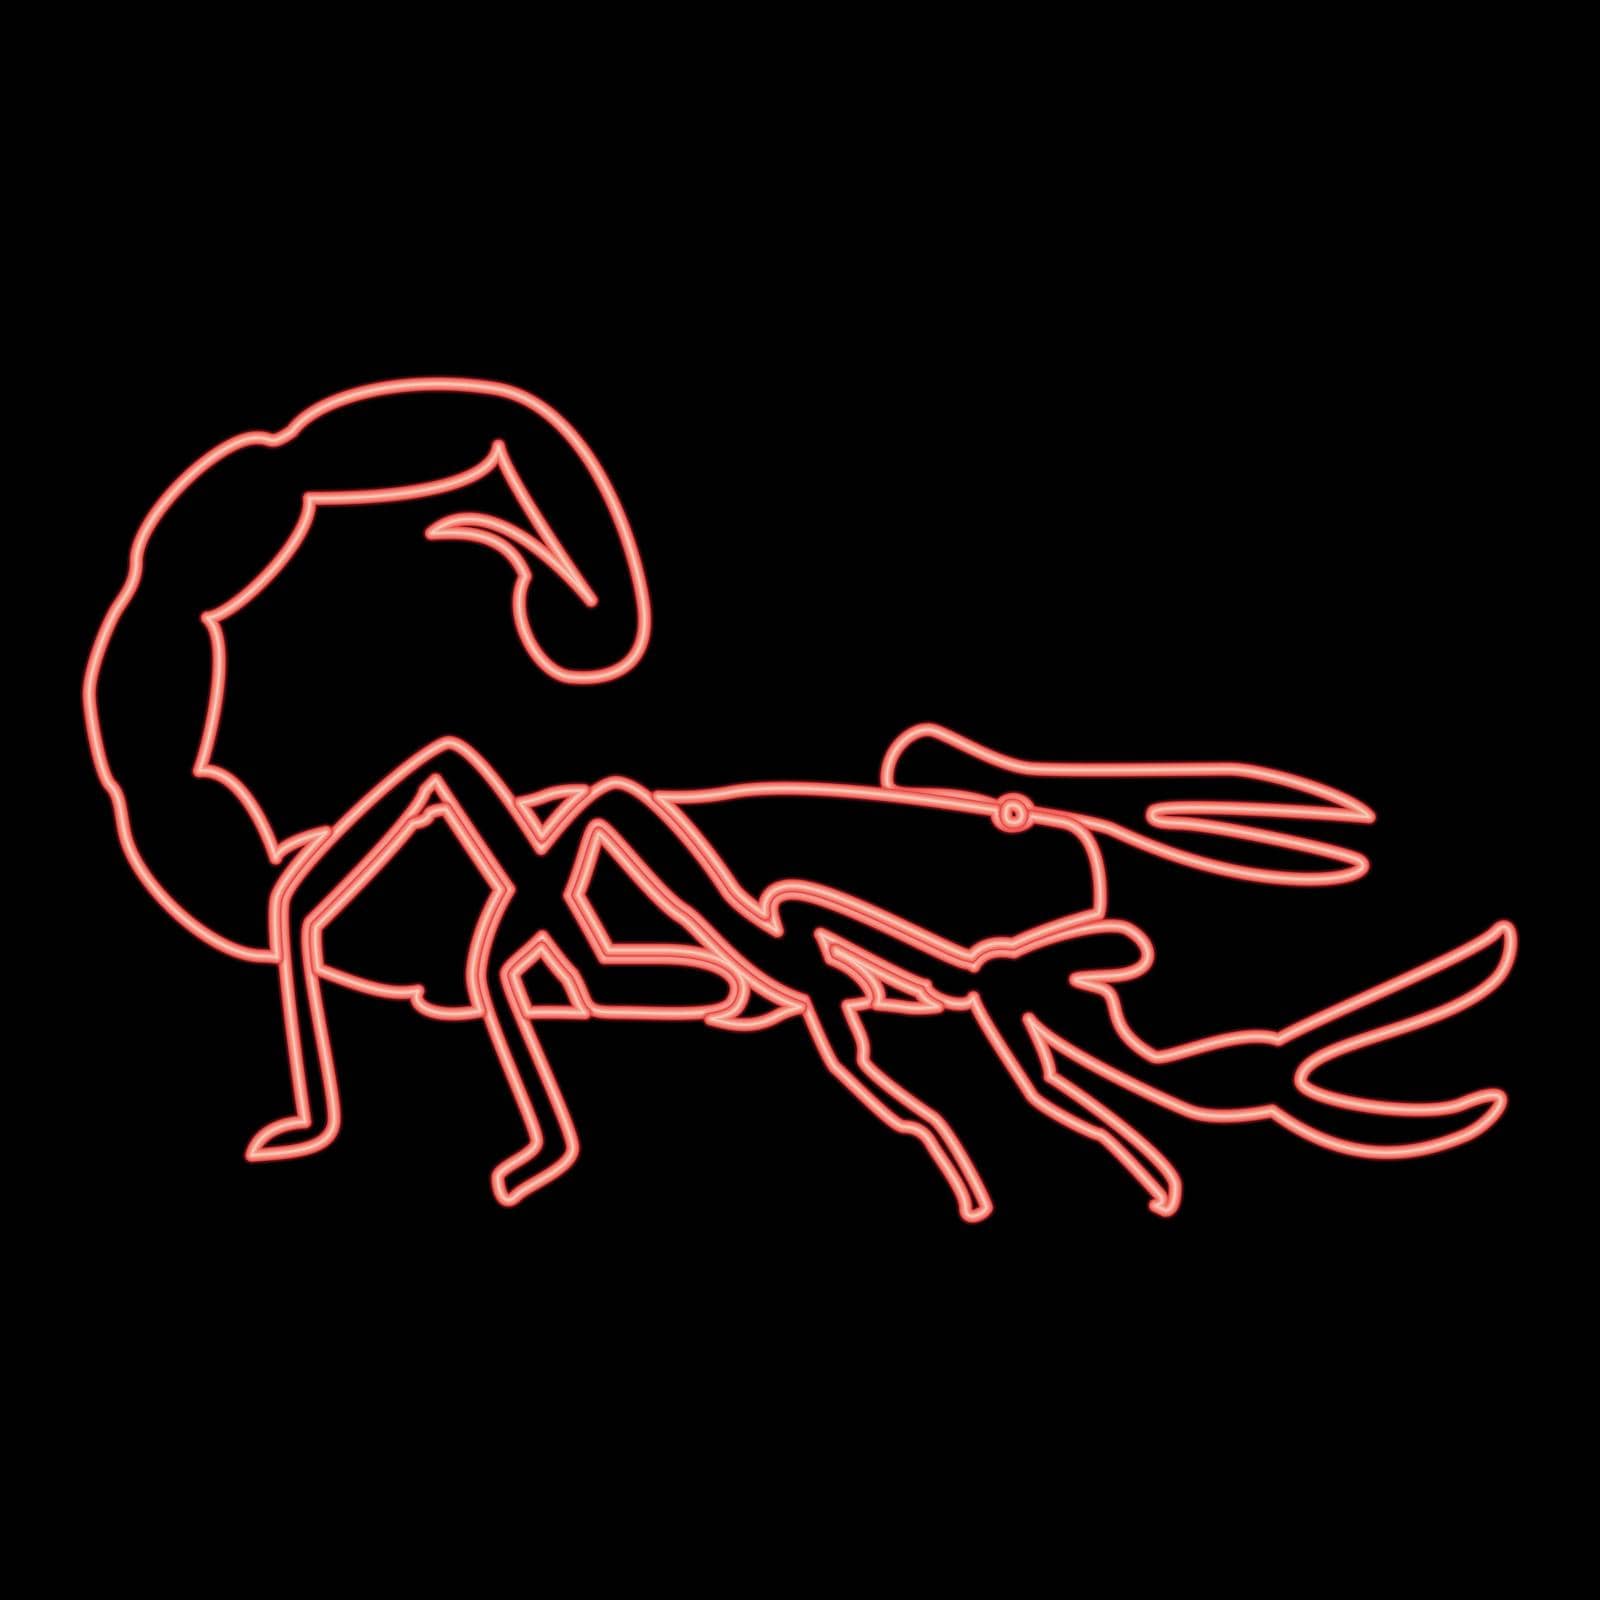 Neon scorpion red color vector illustration flat style image by serhii435